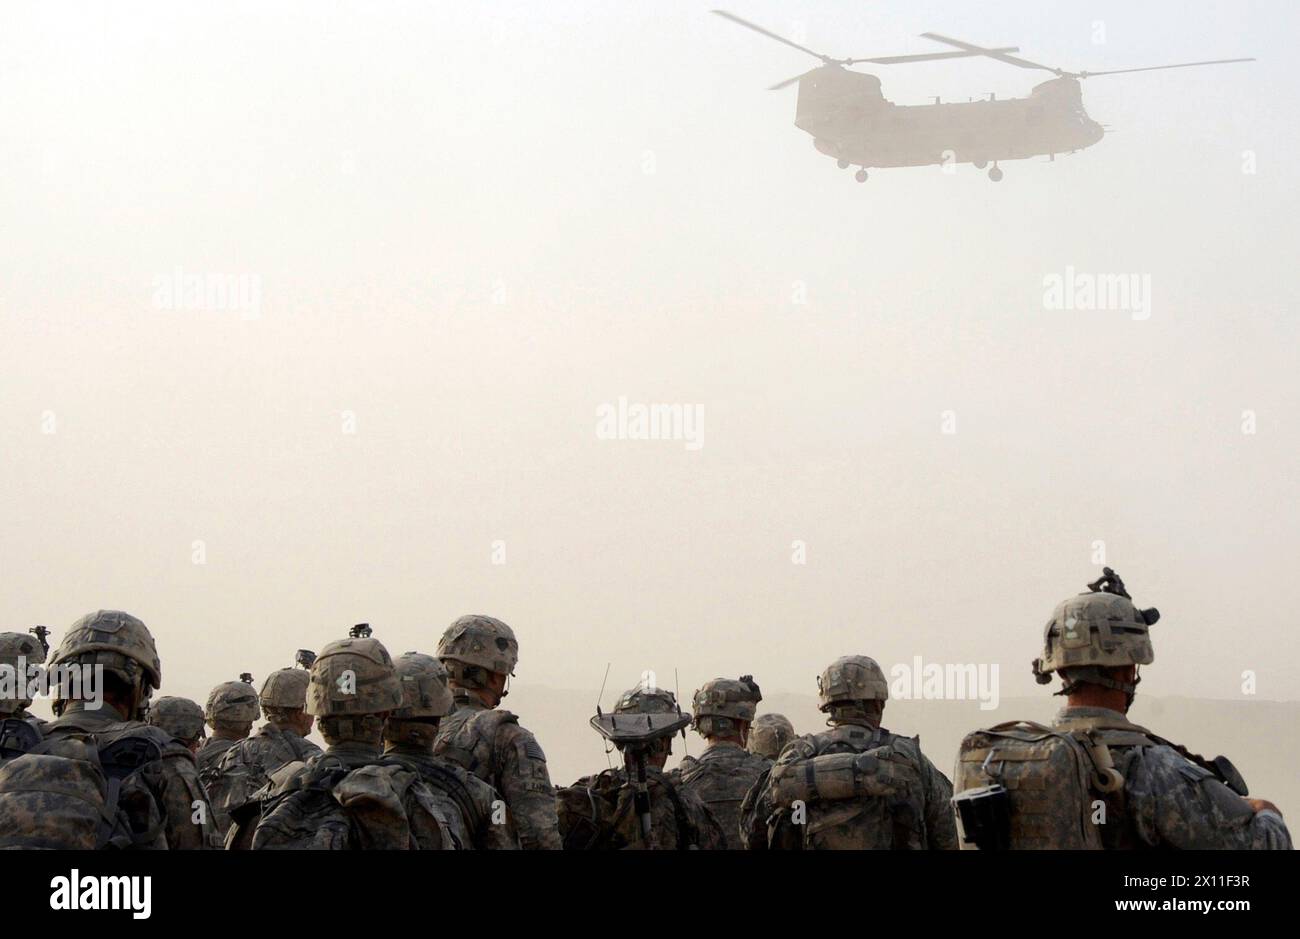 Paratroopers from the 1st Platoon, Company C, 1st Battalion, 501st Infantry Regiment, 4th Brigade Combat Team, 25th Infantry Division, watch as a CH-47 Chinook helicopter begins its decent during a dust storm at Forward Operating Base Kushamond, Afghanistan, in preparation for an air-assault mission ca. September 07, 2004 (metadata lists year as 2009) Stock Photo